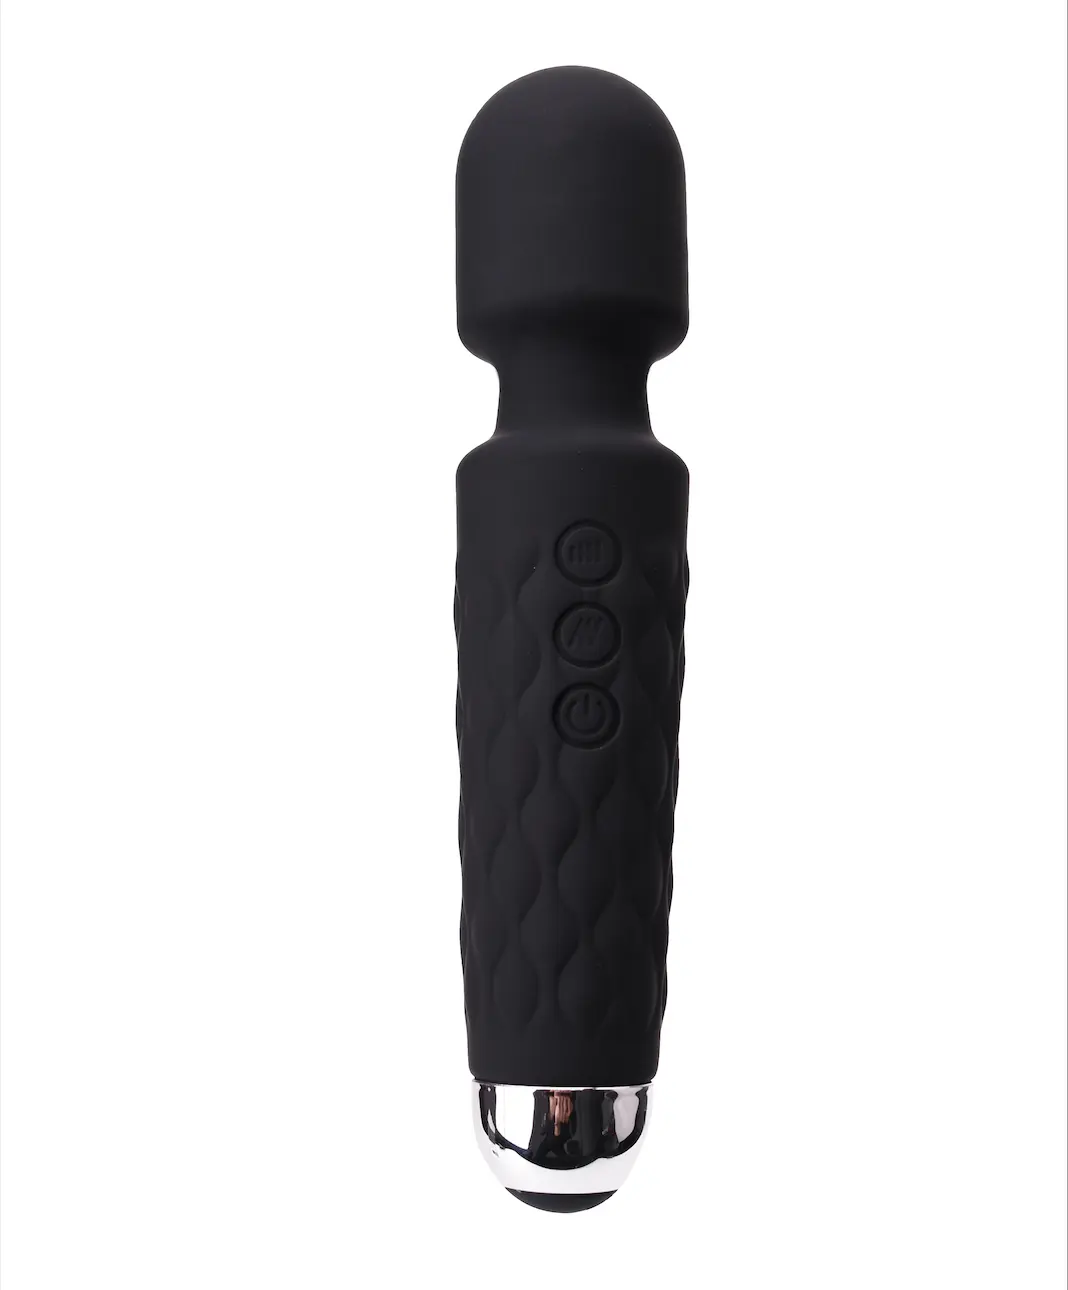 20 Speeds Strong Massager Vibrator Rechargeable USB Charging Silicone Orgasm Massager Powerful Orgasm Vibrator